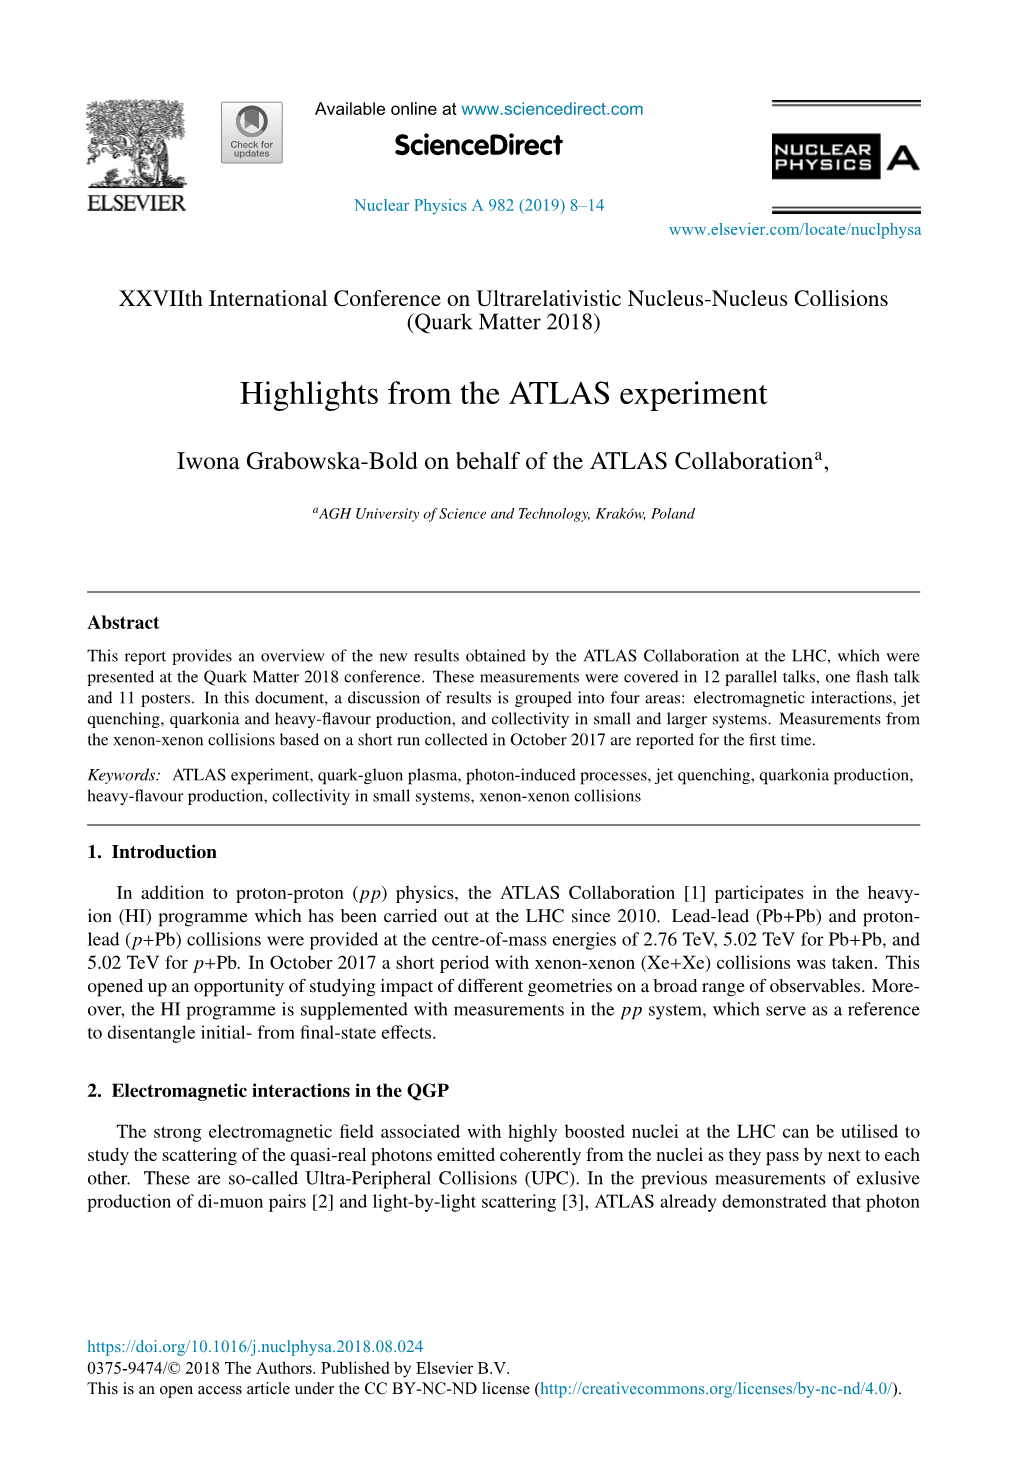 Highlights from the ATLAS Experiment